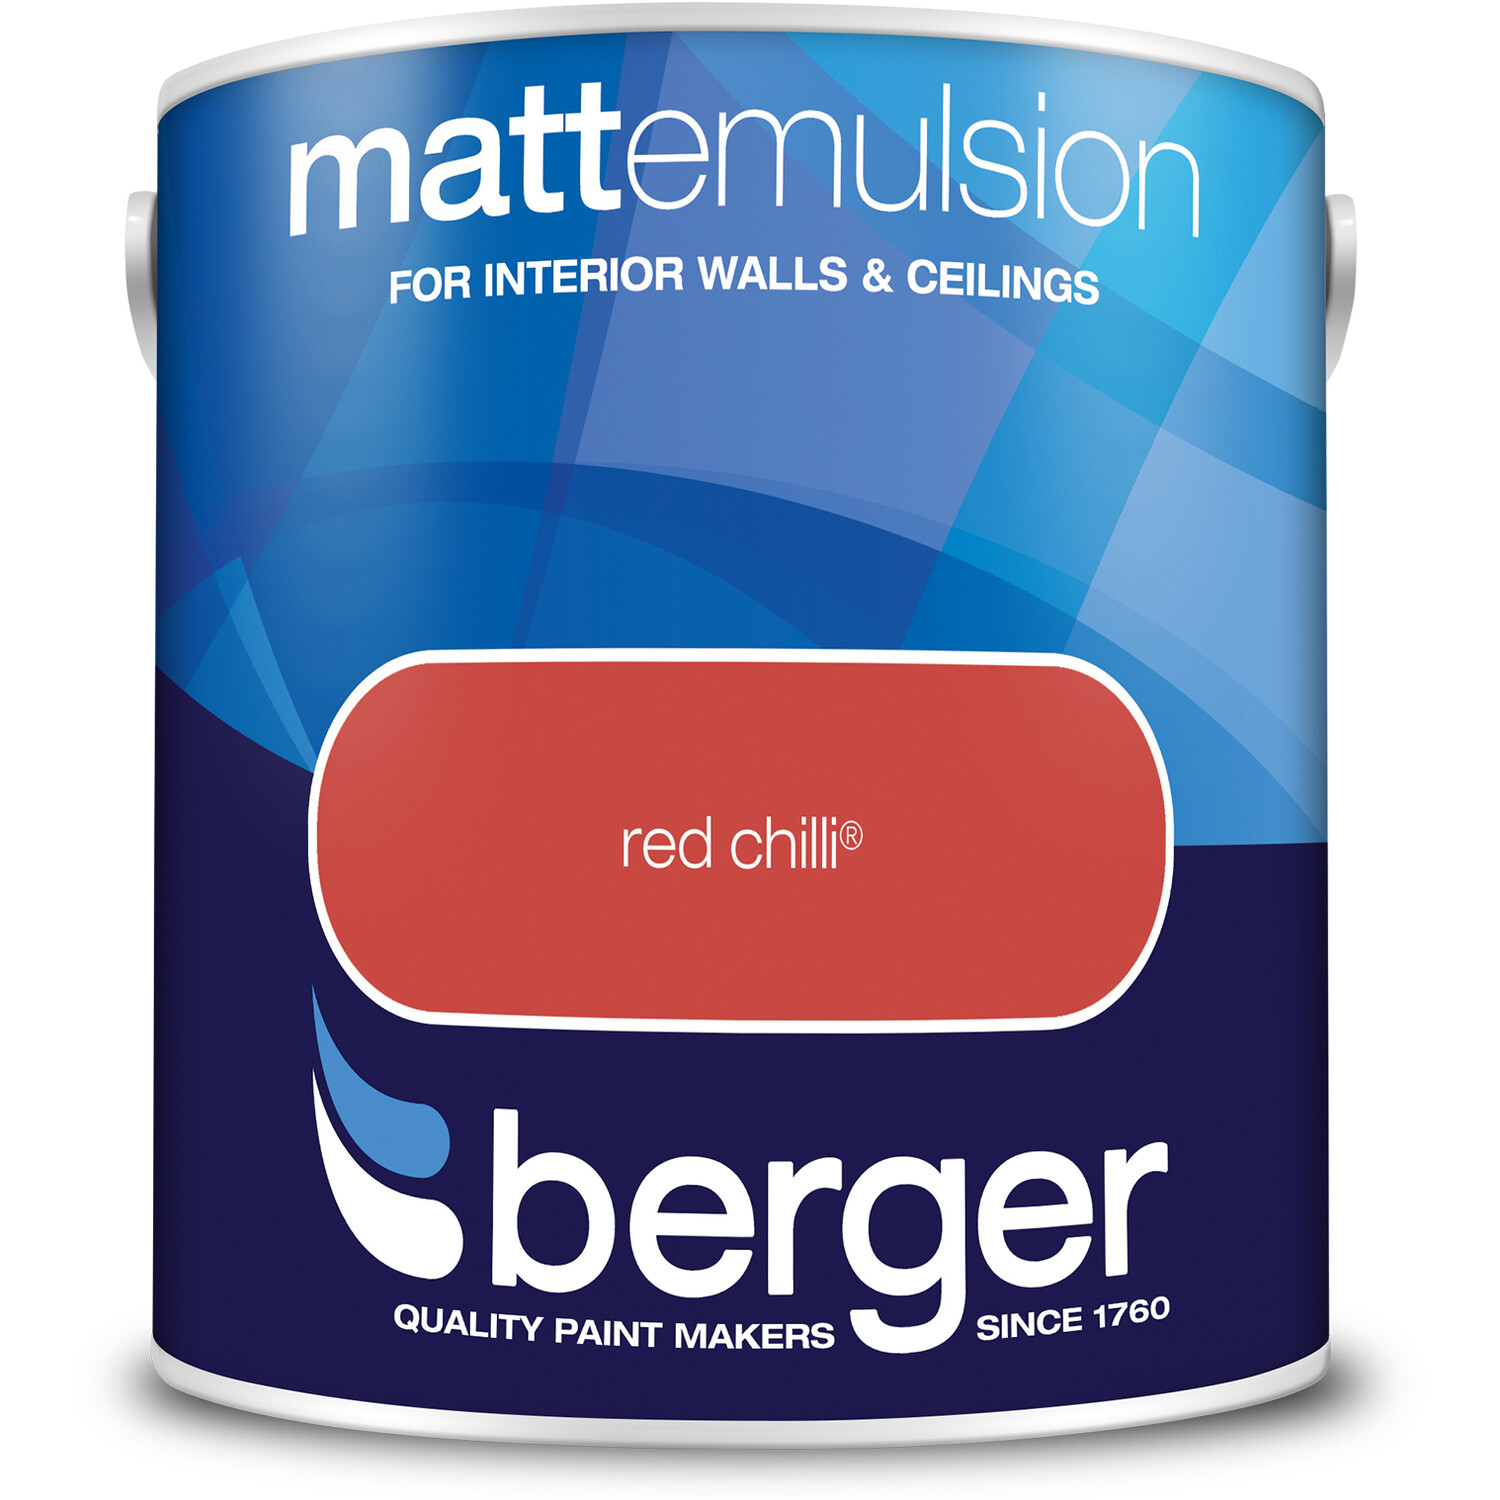 Berger Walls and Ceilings Red Chilli Matt Emulsion Paint 2.5L Image 2